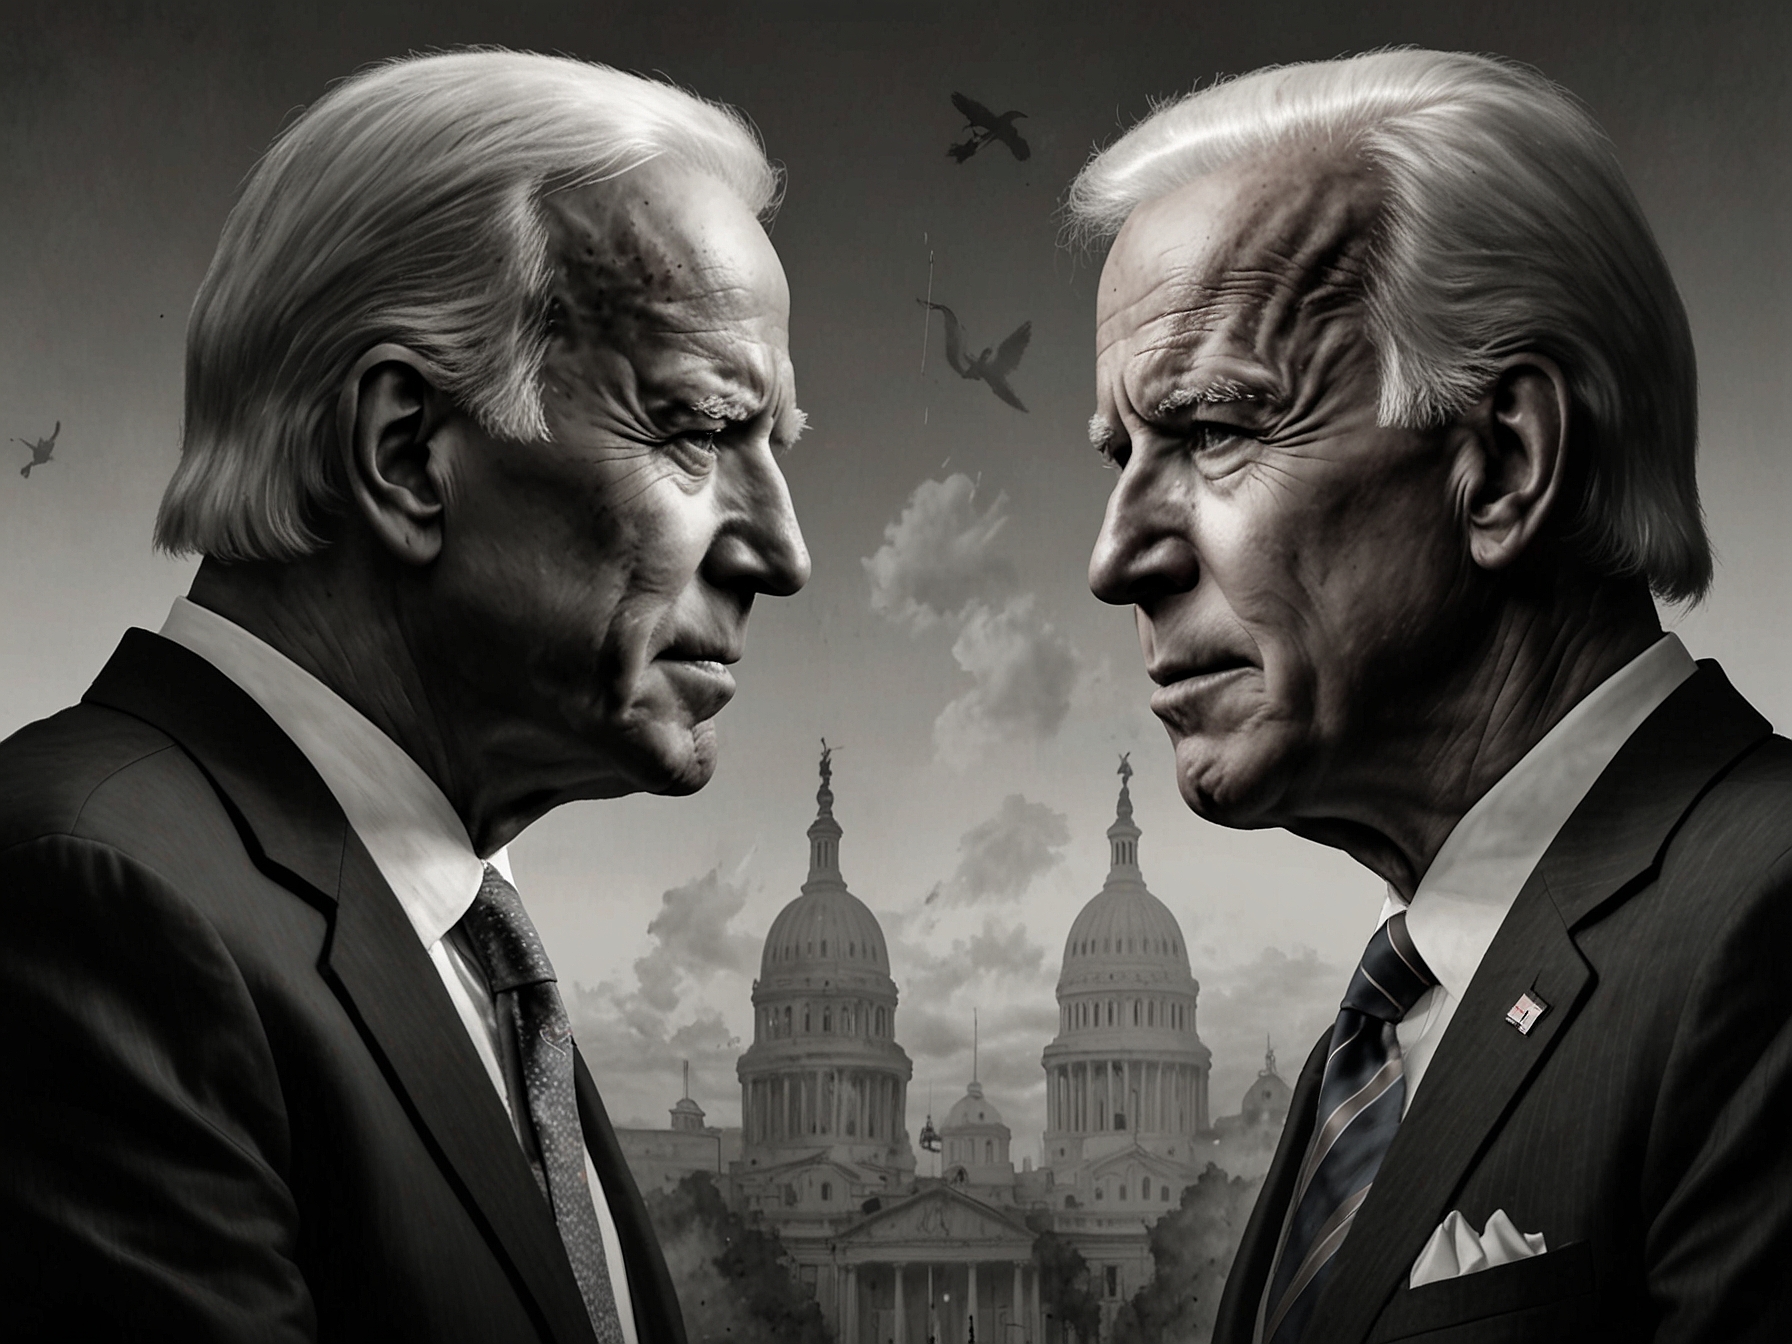 A split-screen image showing Biden and Trump during the heated 2024 presidential debate, each passionately making claims on critical issues like the economy and immigration.